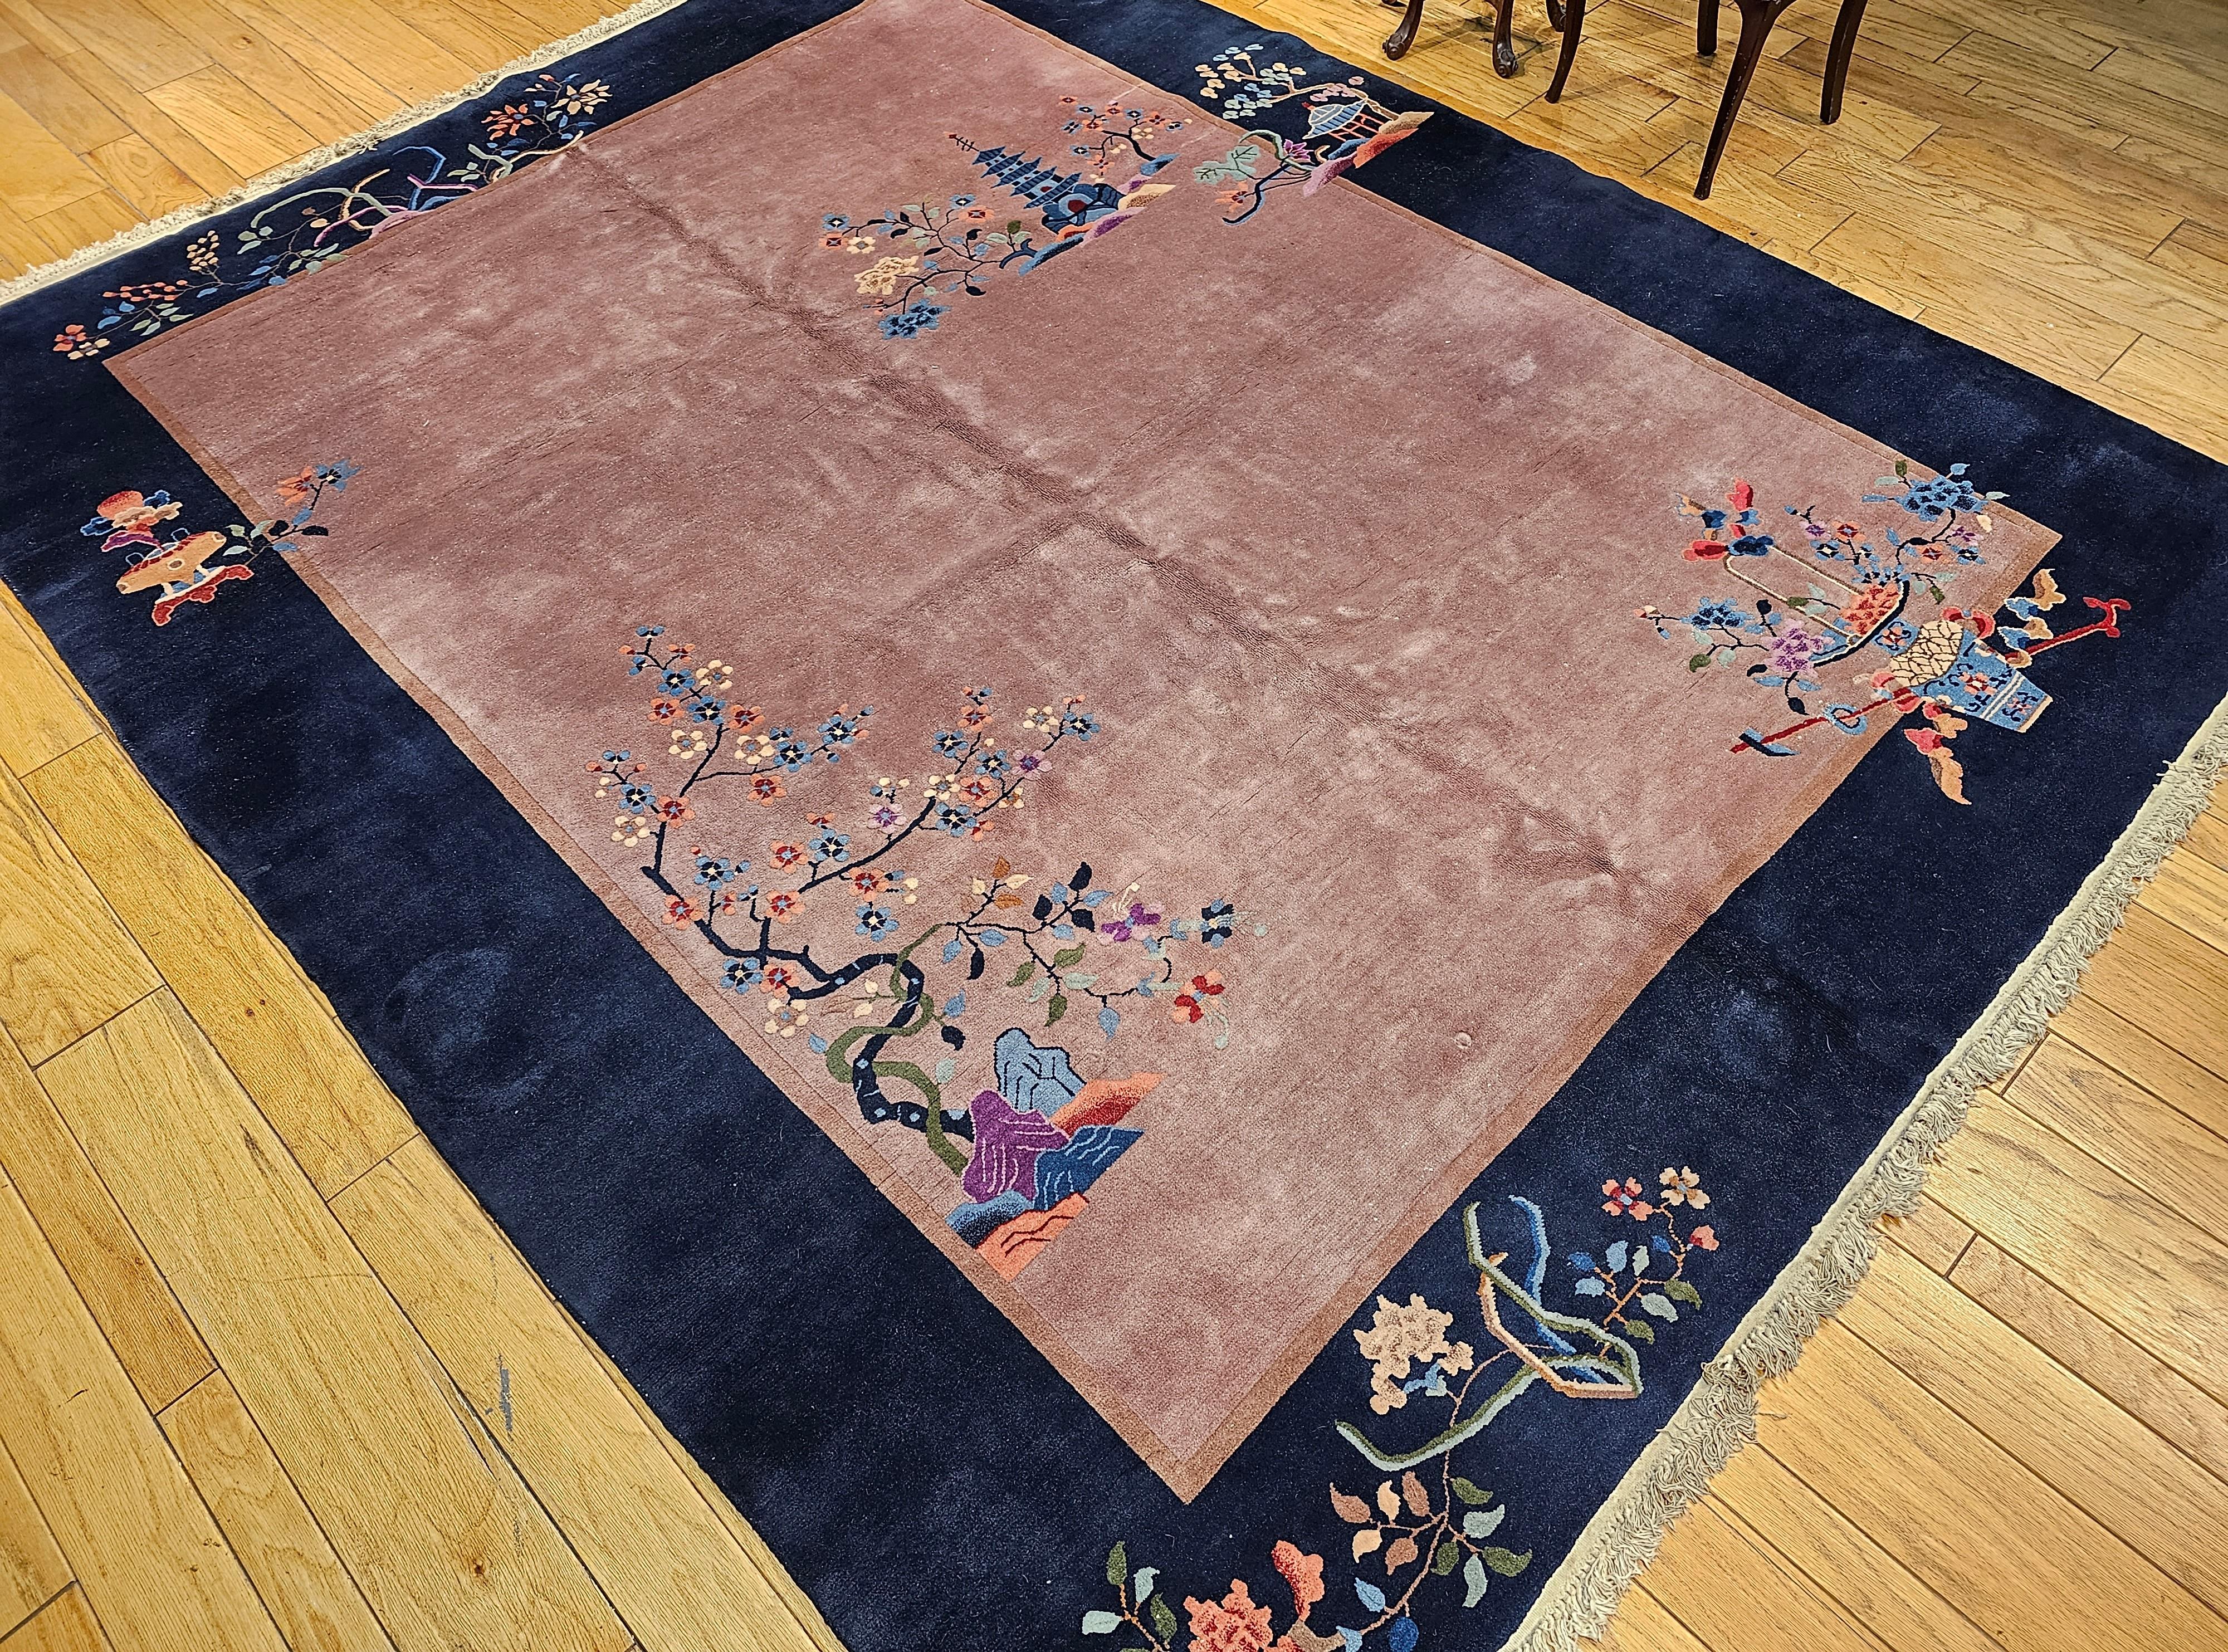 Vintage Art Deco Chinese Nichols Rug in Eggplant, Navy, Blue, Green, Pink For Sale 4